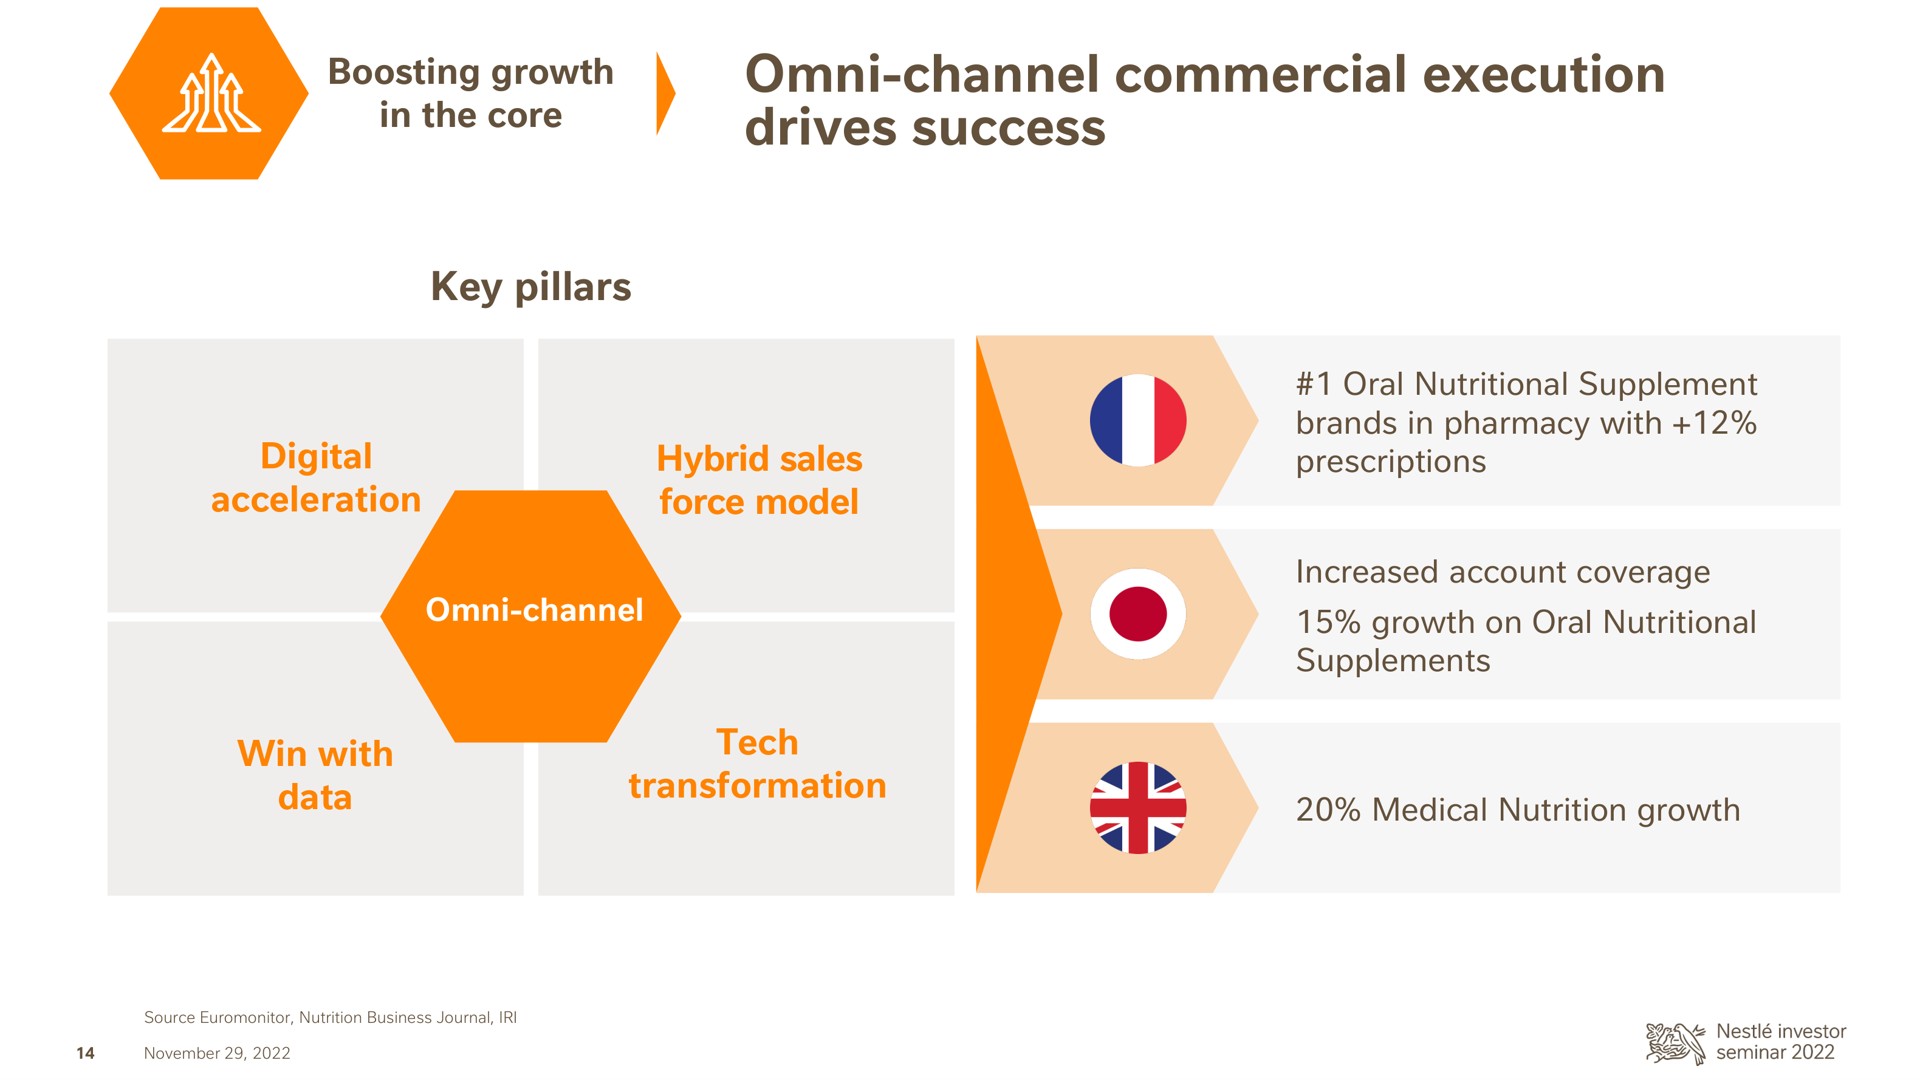 channel commercial execution drives success in the core | Nestle